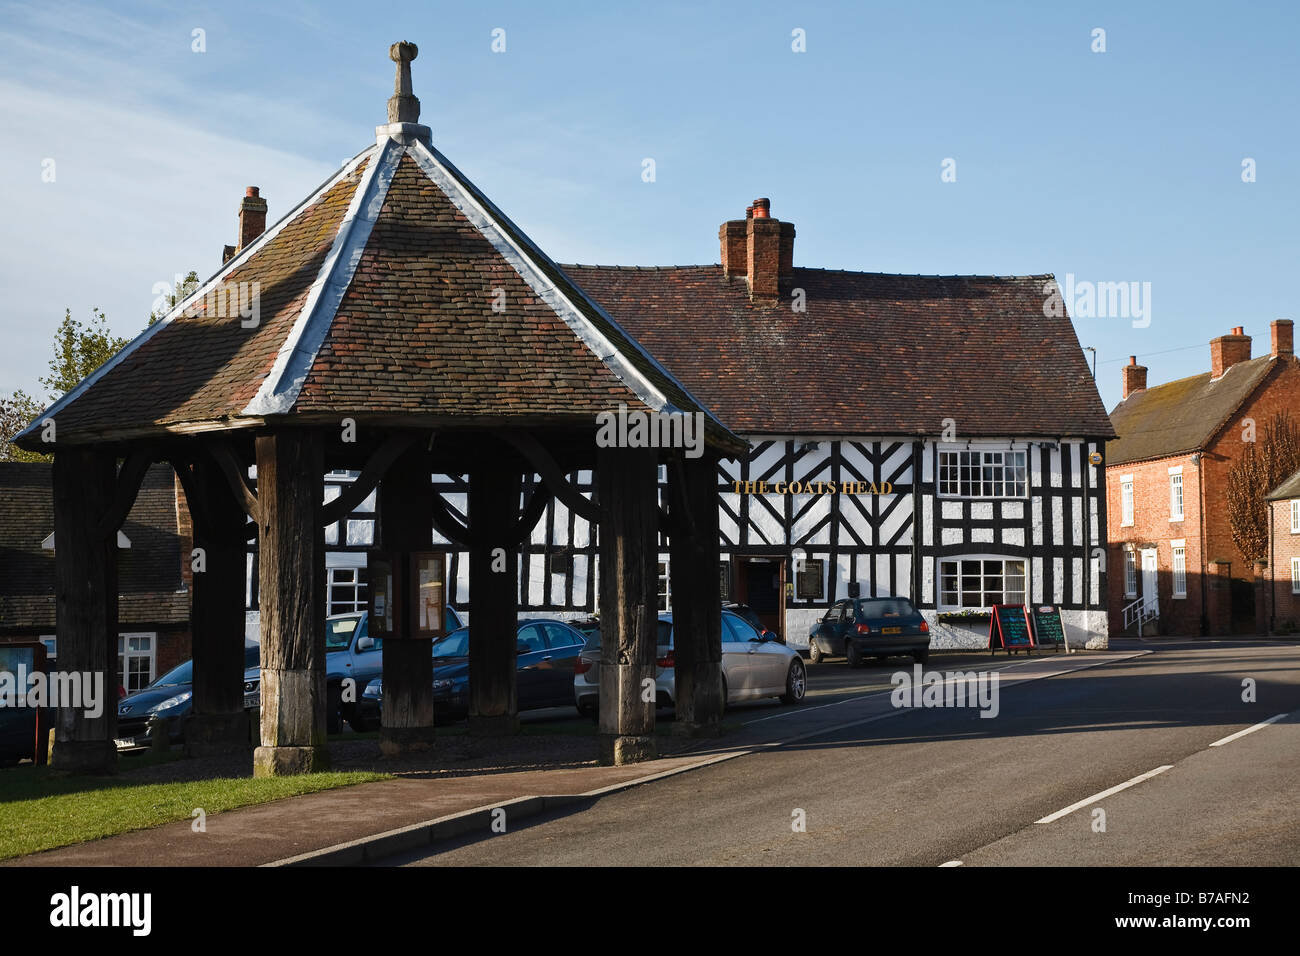 The old marketplace and the Goats Head Hotel, Abbots Bromley, Staffordshire, England, UK Stock Photo